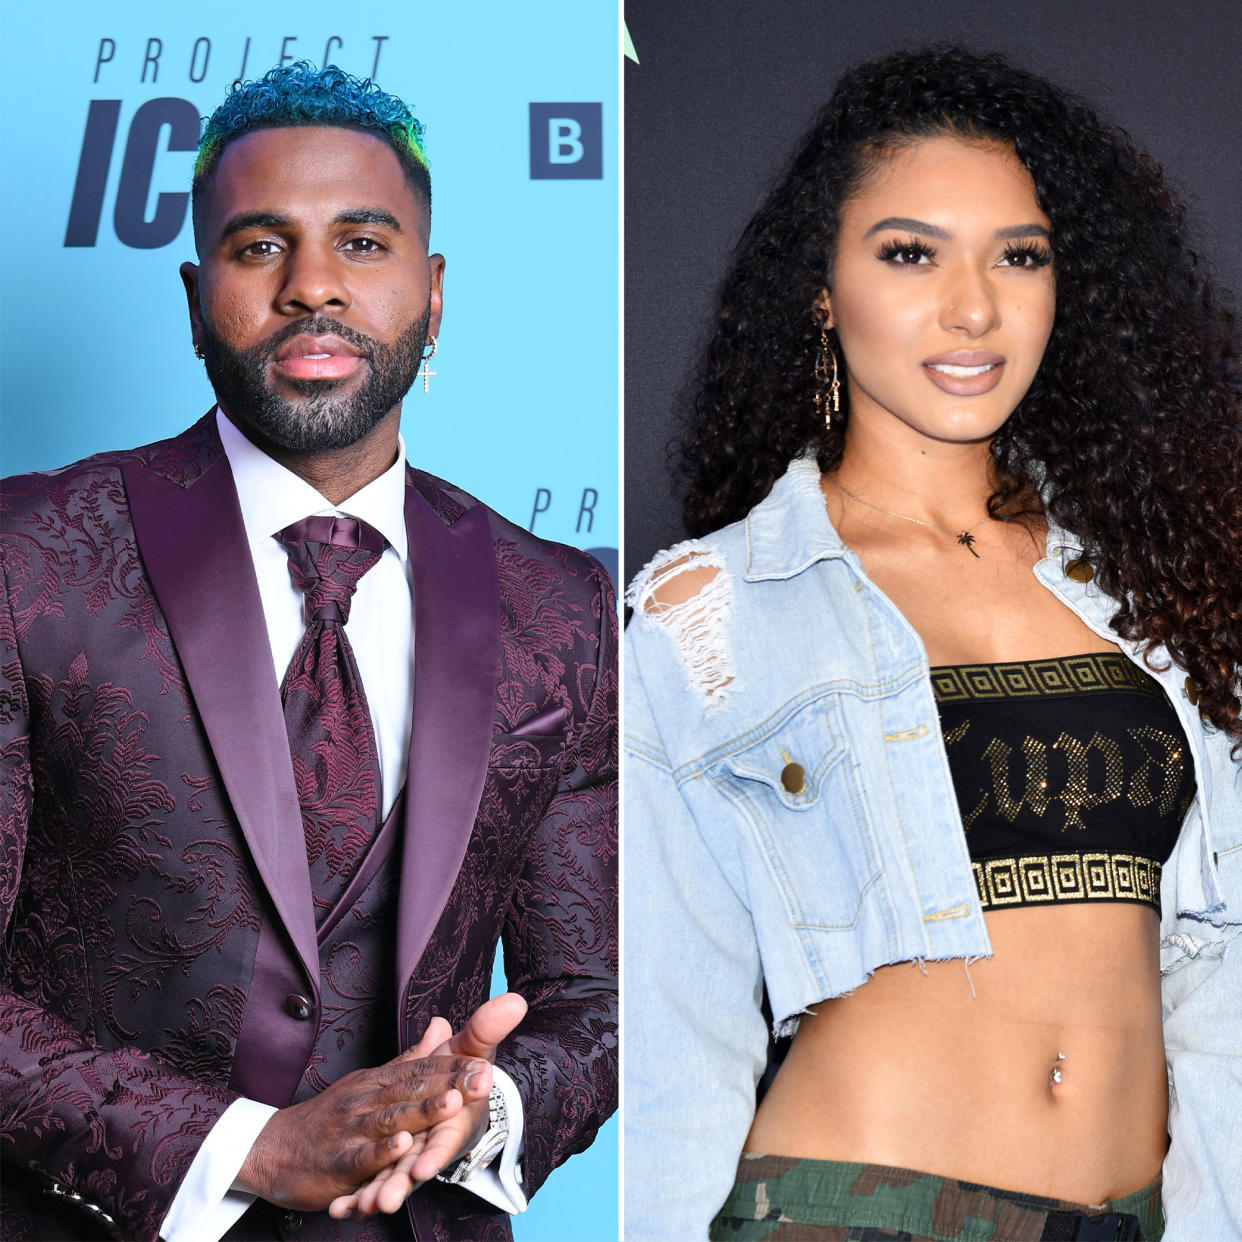 Jason Derulo Accused of Sexual Harassment by Singer Emaza Gibson